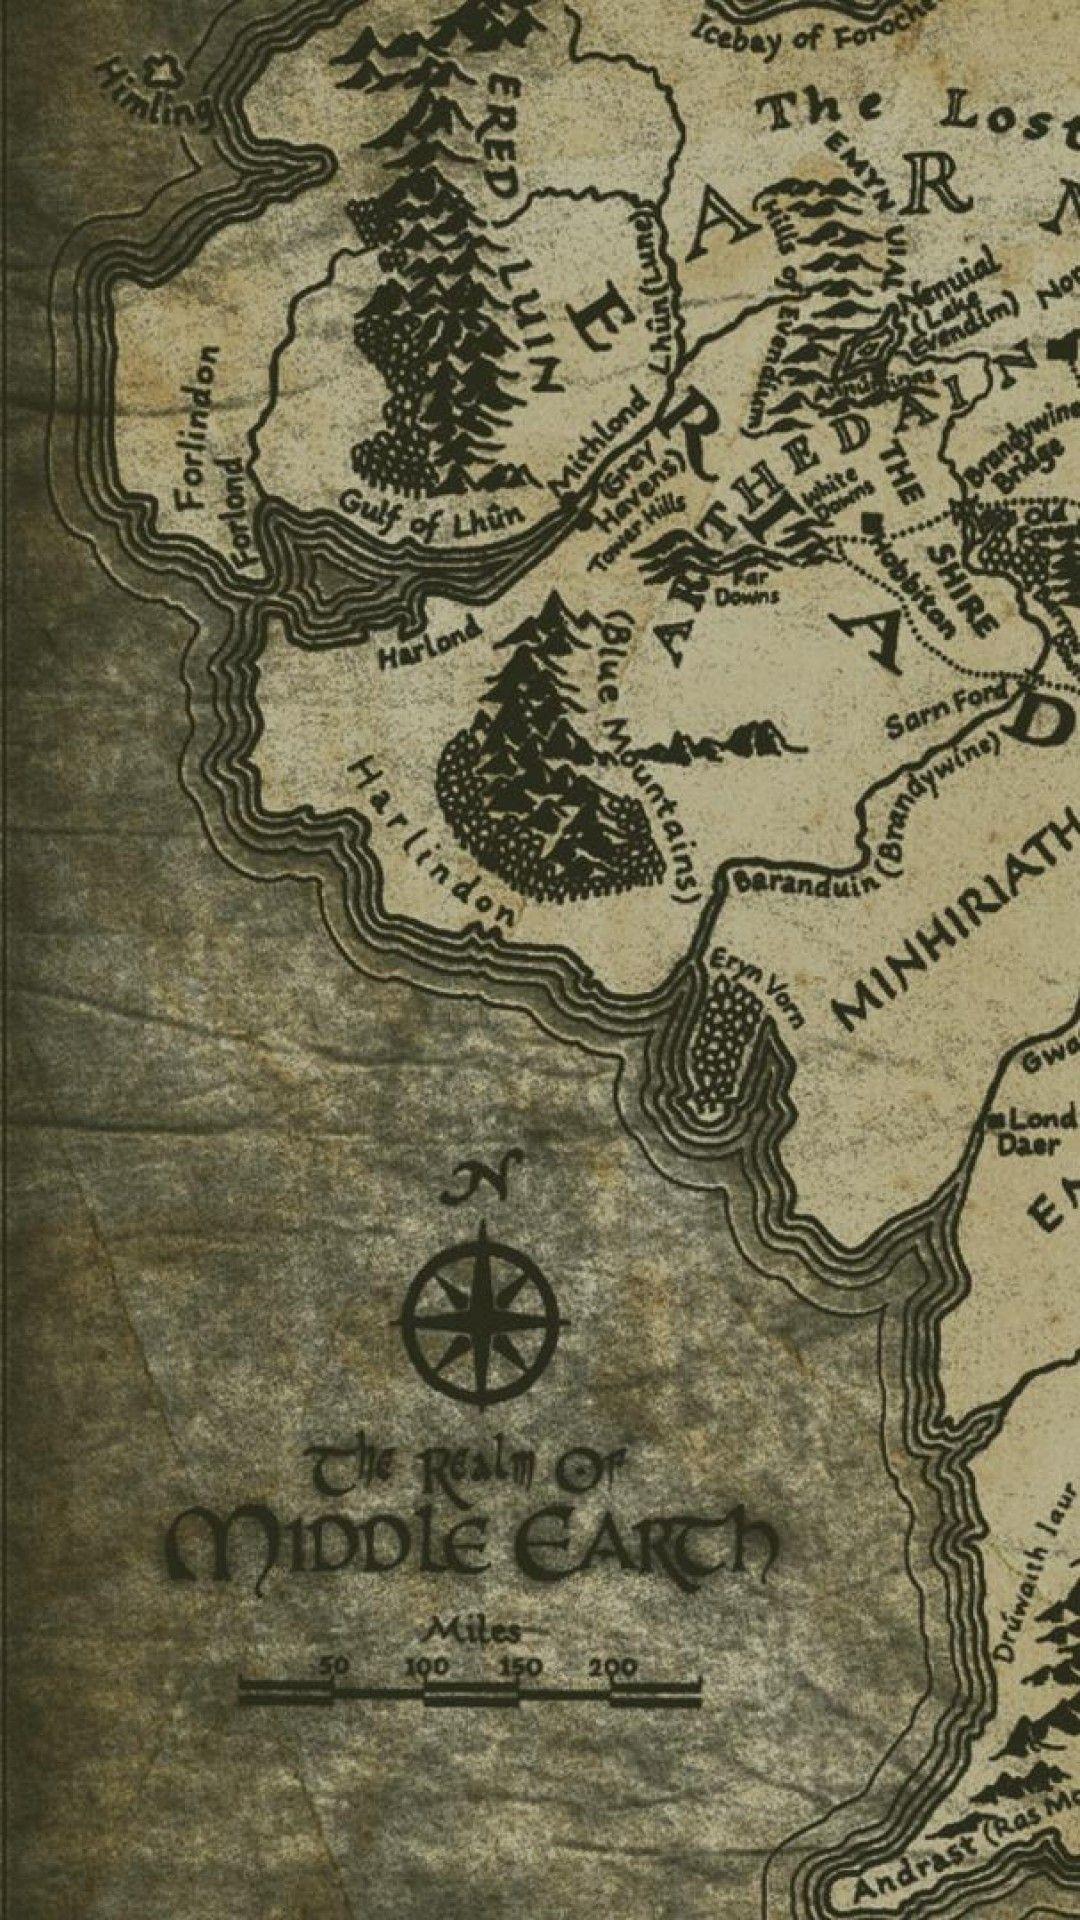 The Lord of the Rings iPhone Wallpaper HD. iPhone Wallpaper. The hobbit, Lord of the rings, Middle earth map